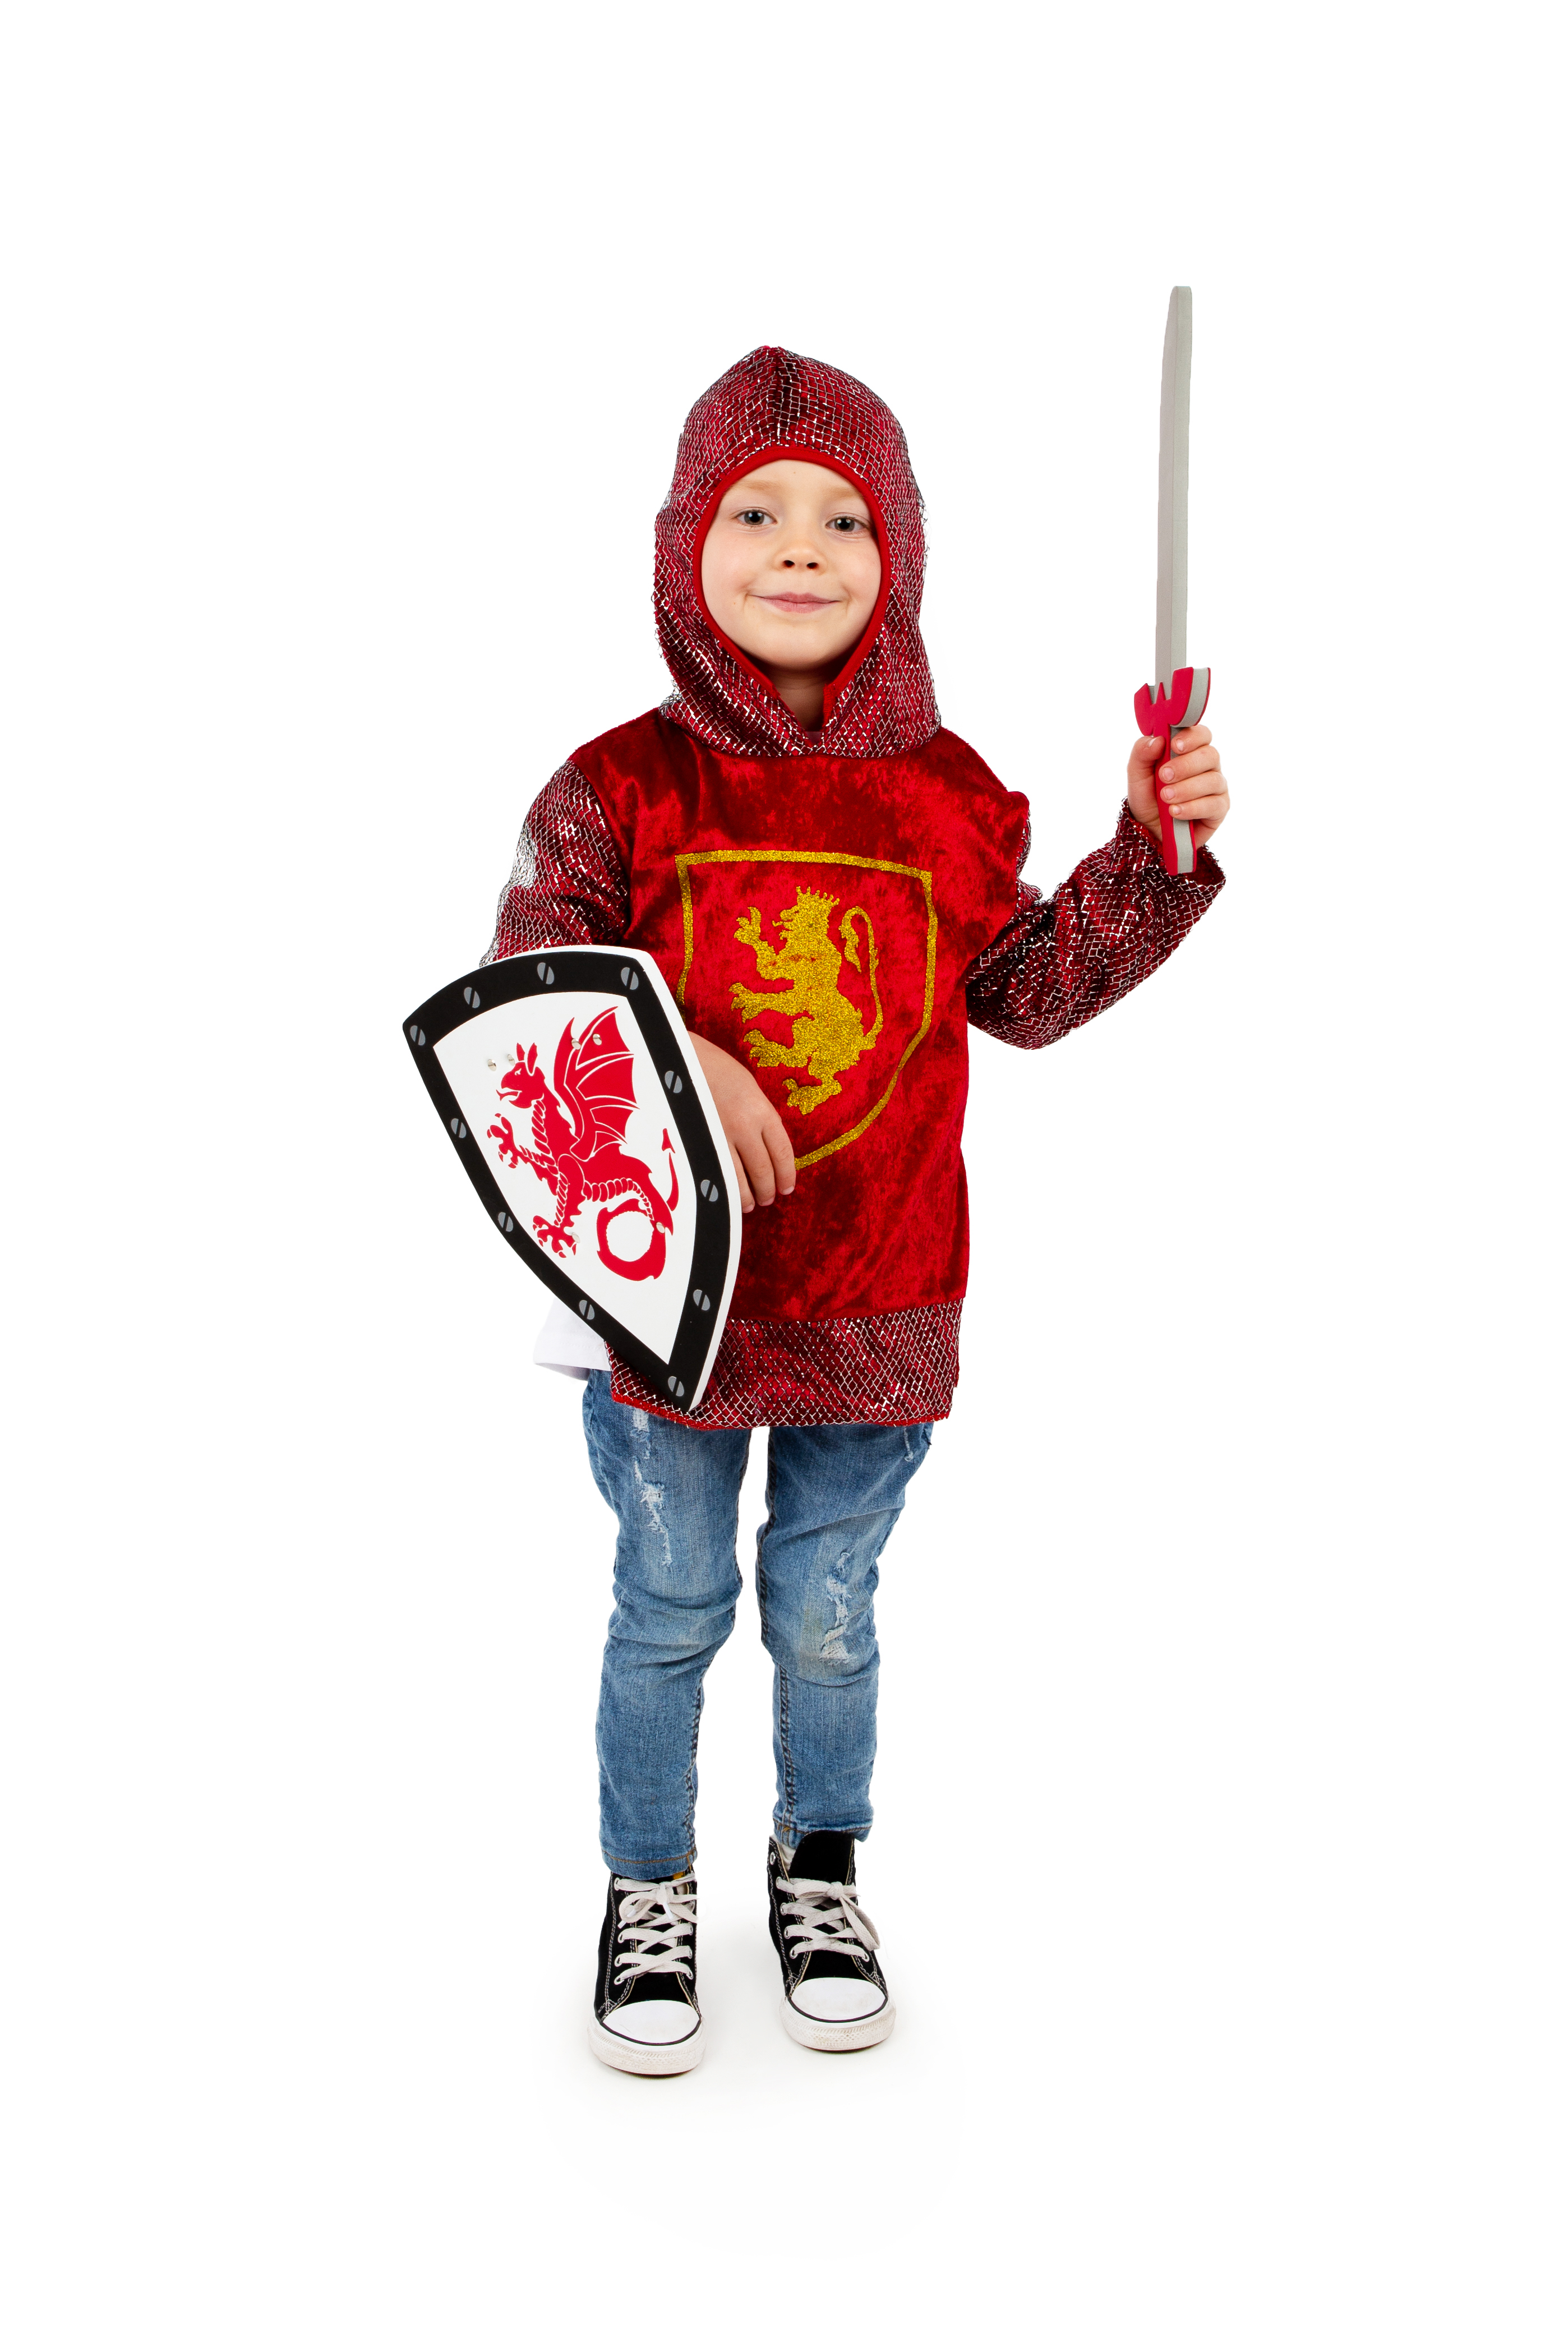 Knights Tunic Dress-up outfit for Kids 3/5 IMG Small 1